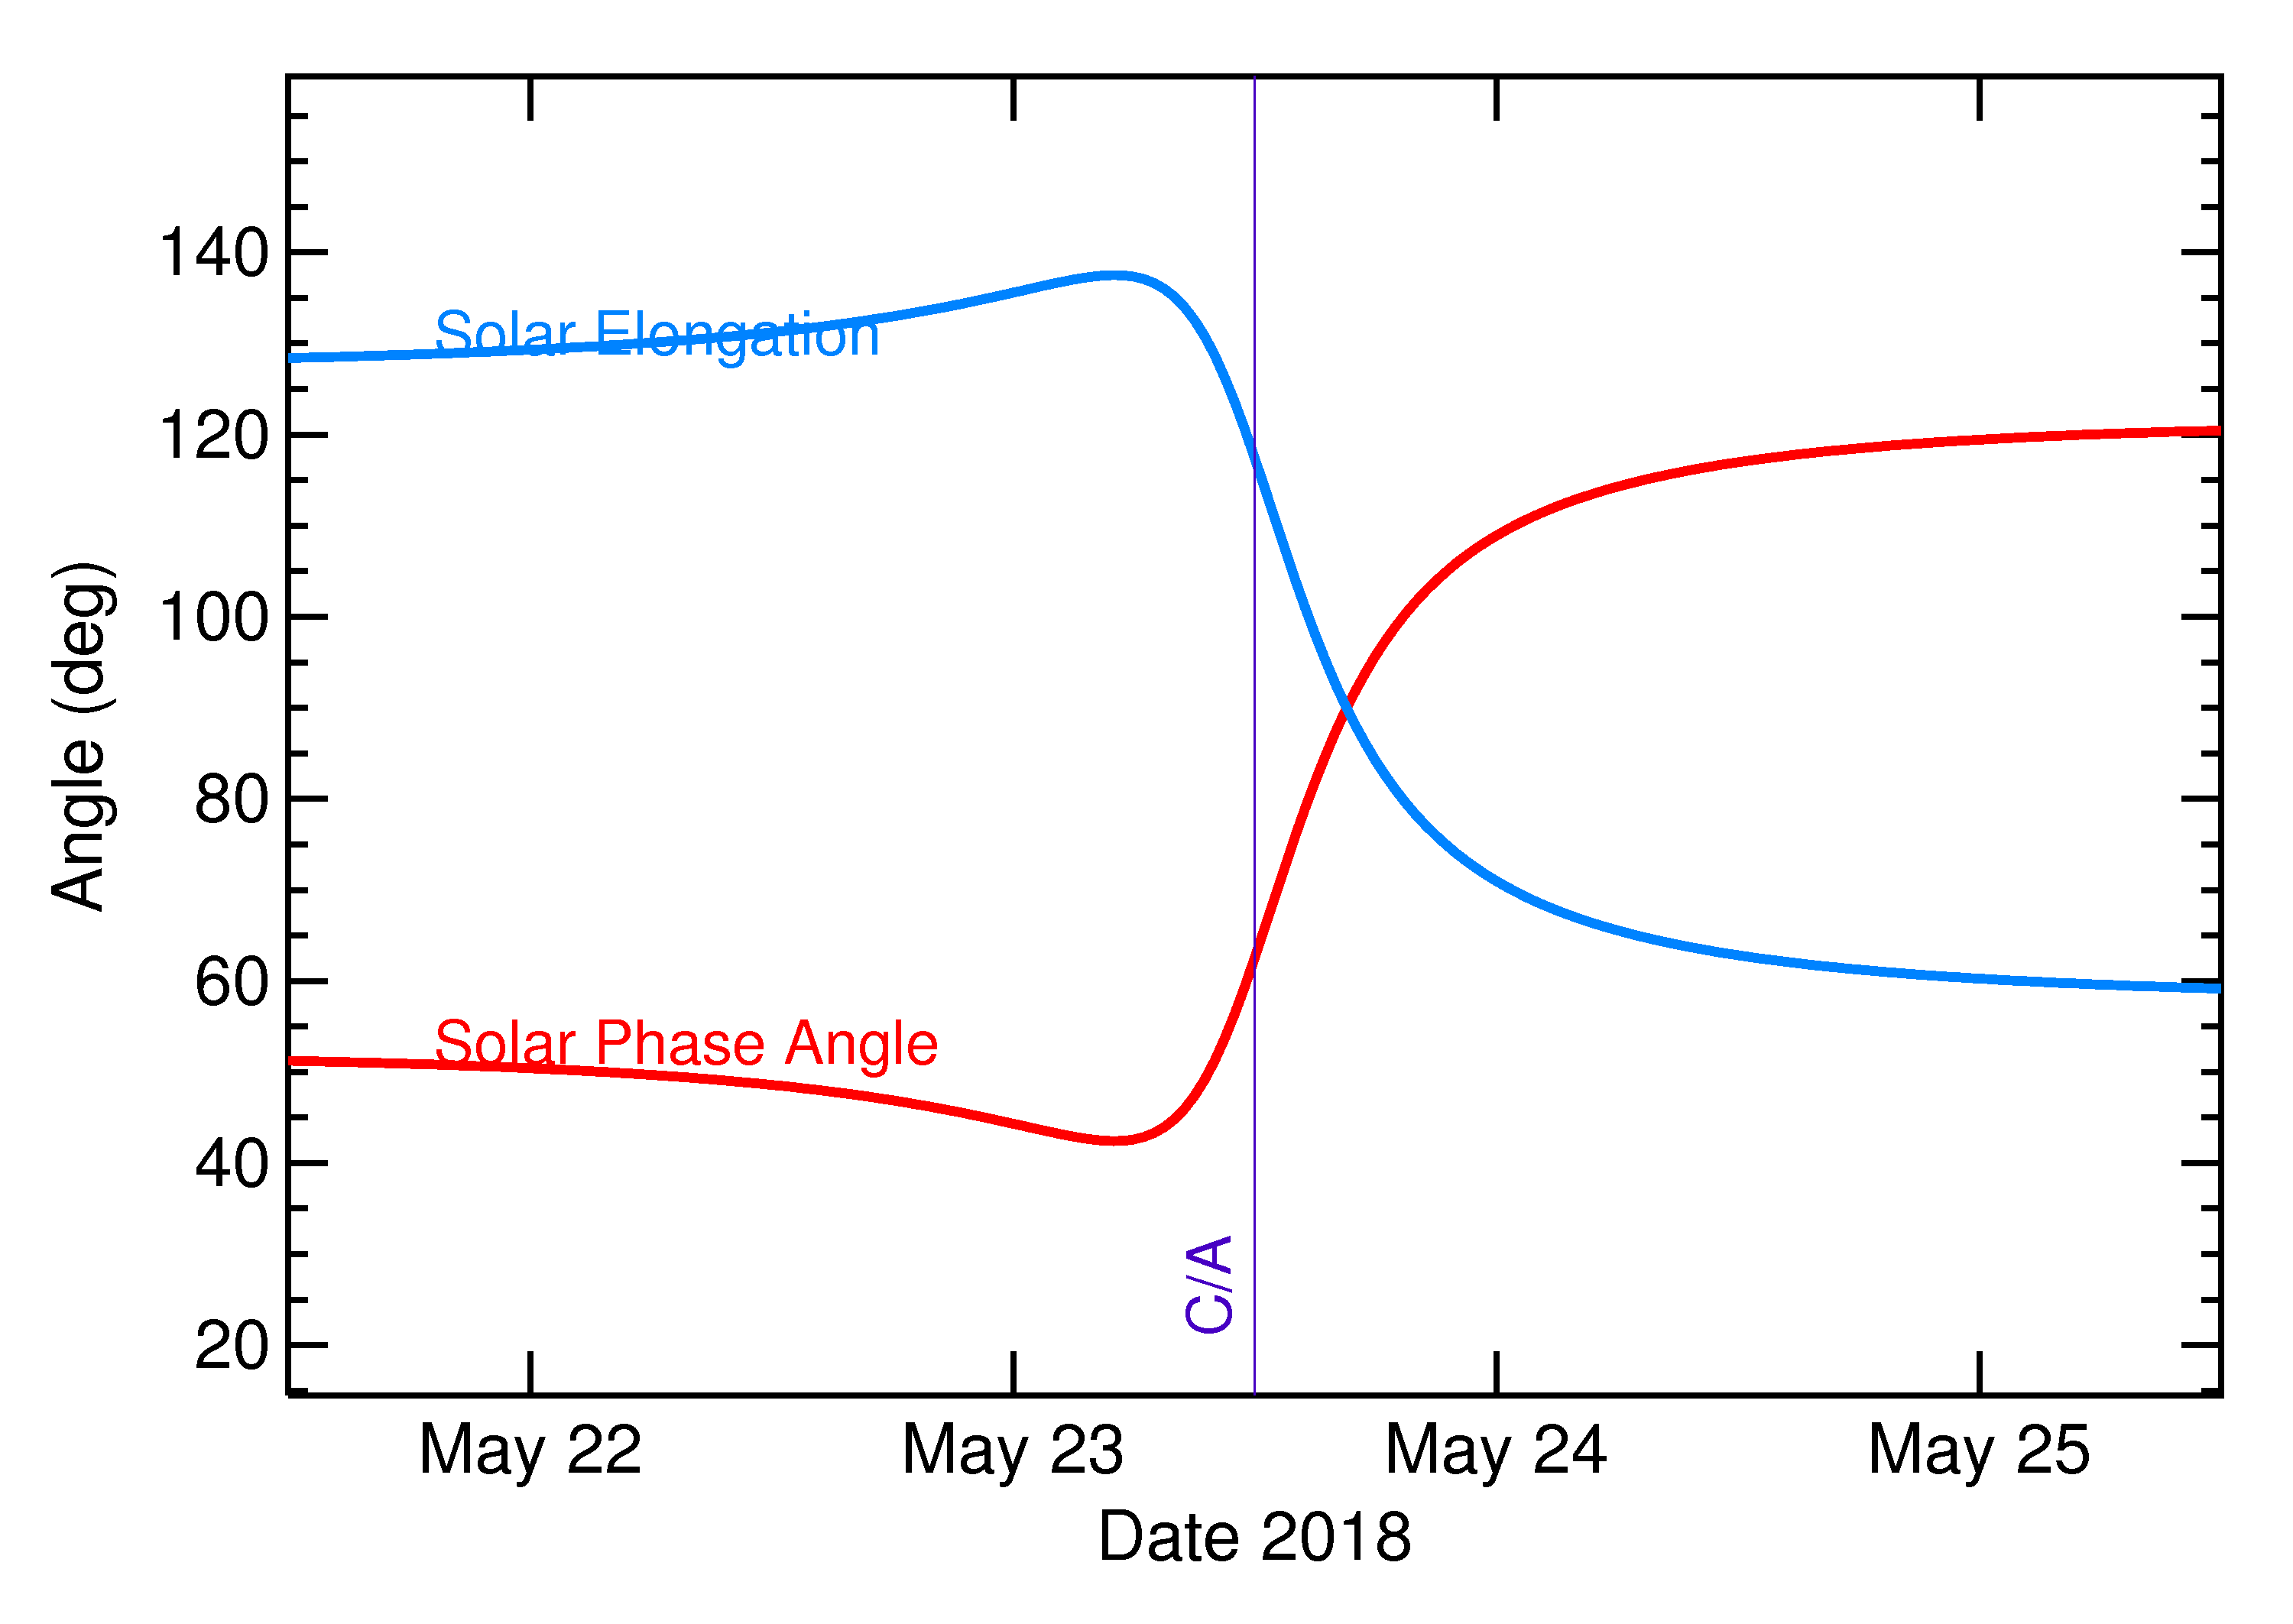 Solar Elongation and Solar Phase Angle of 2018 KW1 in the days around closest approach